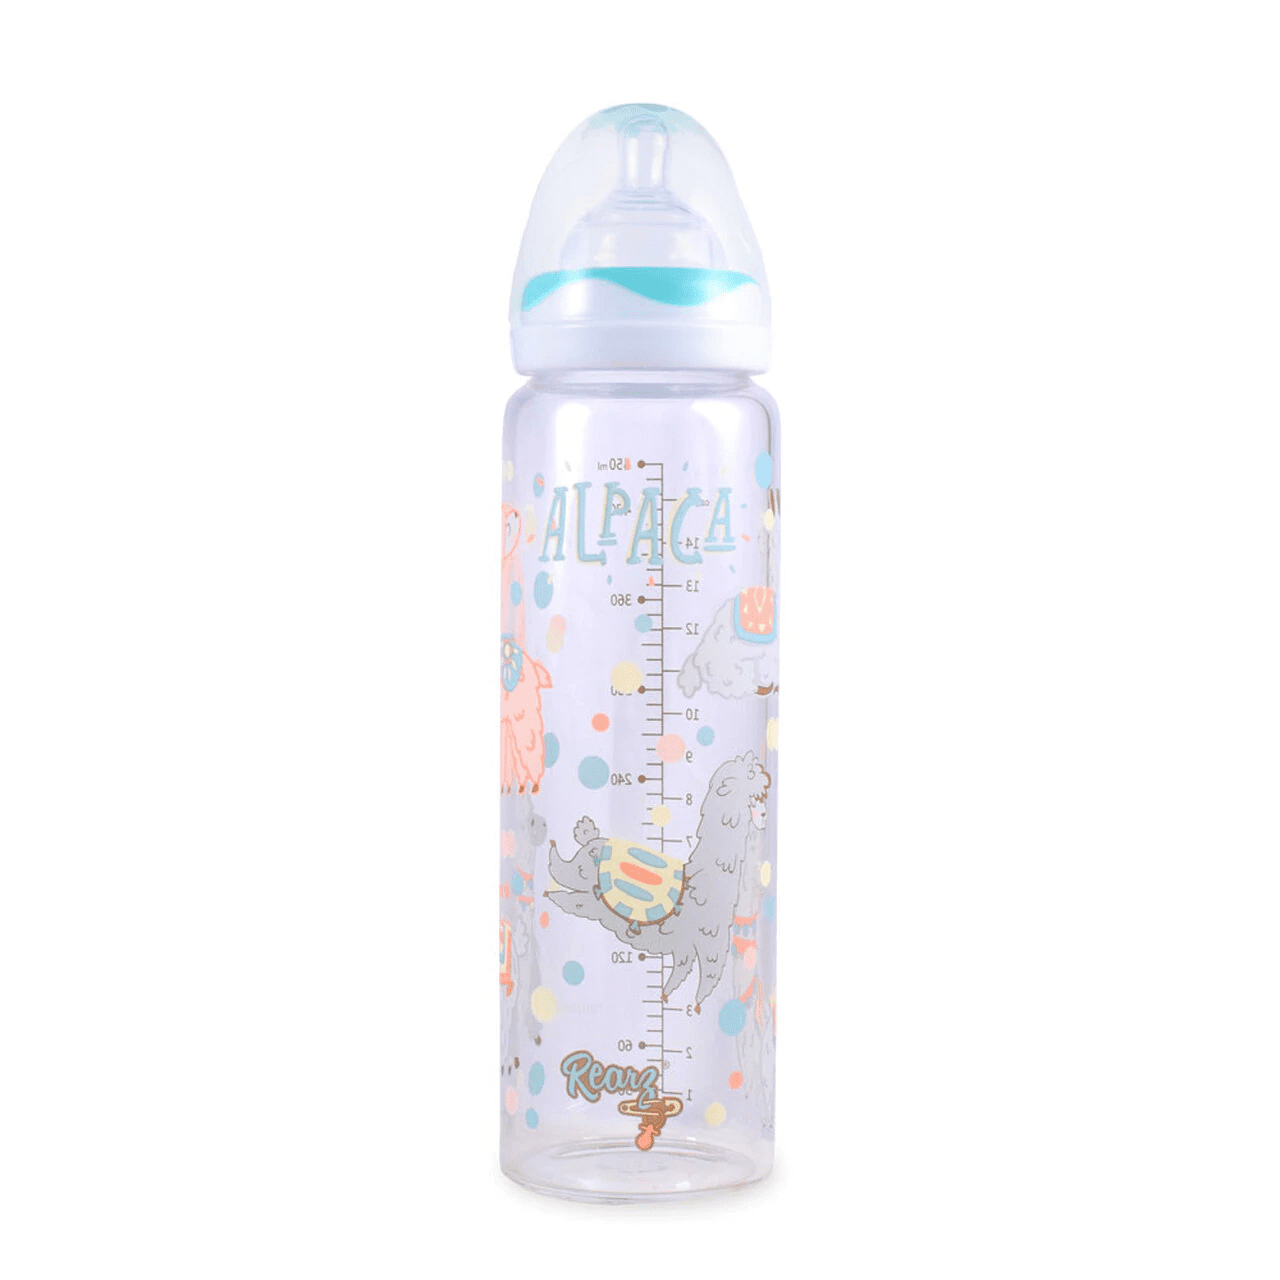 ABDL Adult Baby Bottle Large Size Pacifier Ageplay Silicone Nipple